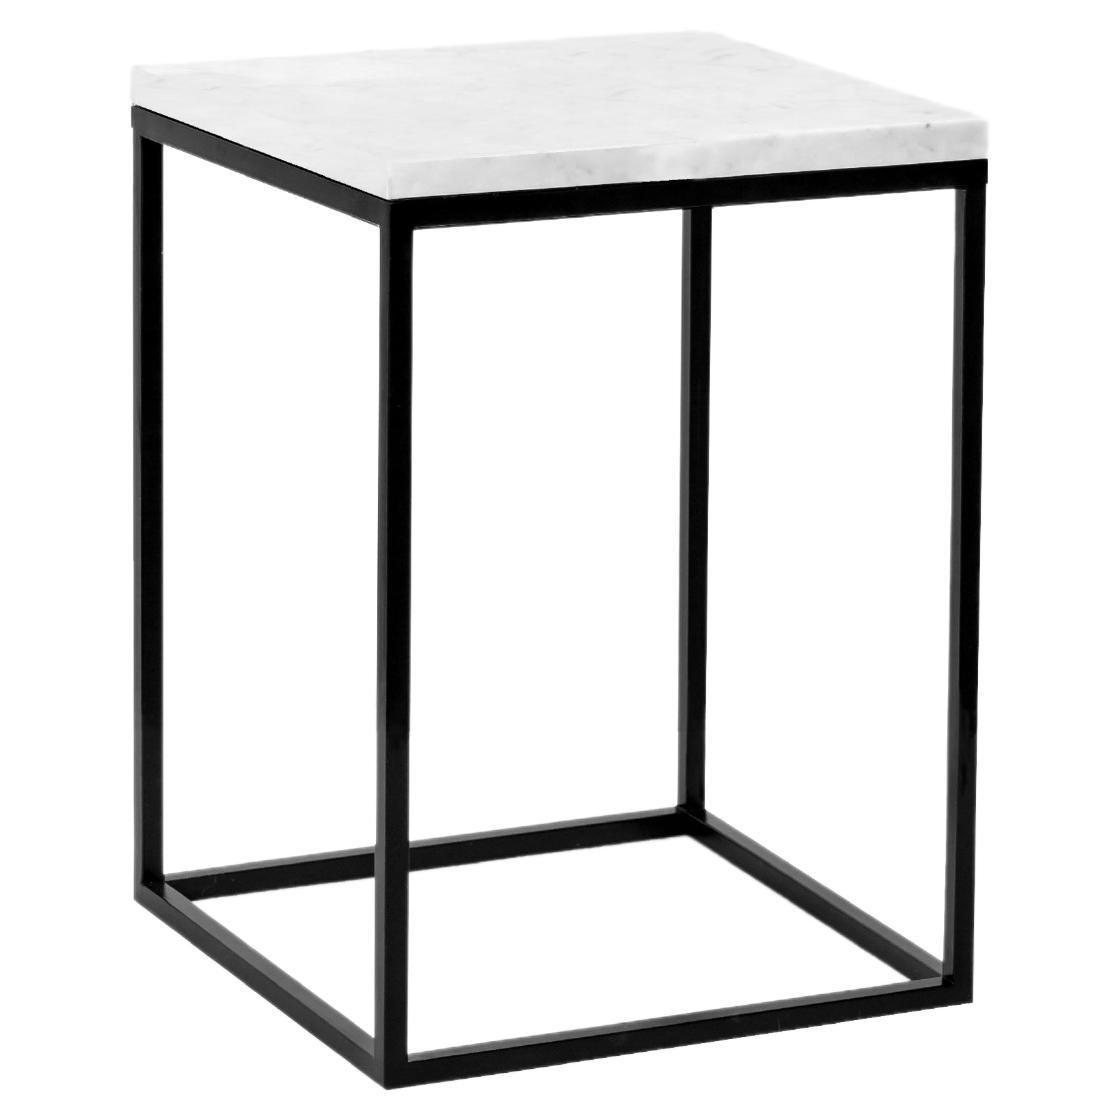 Small White Pillar Side Table by Un’common